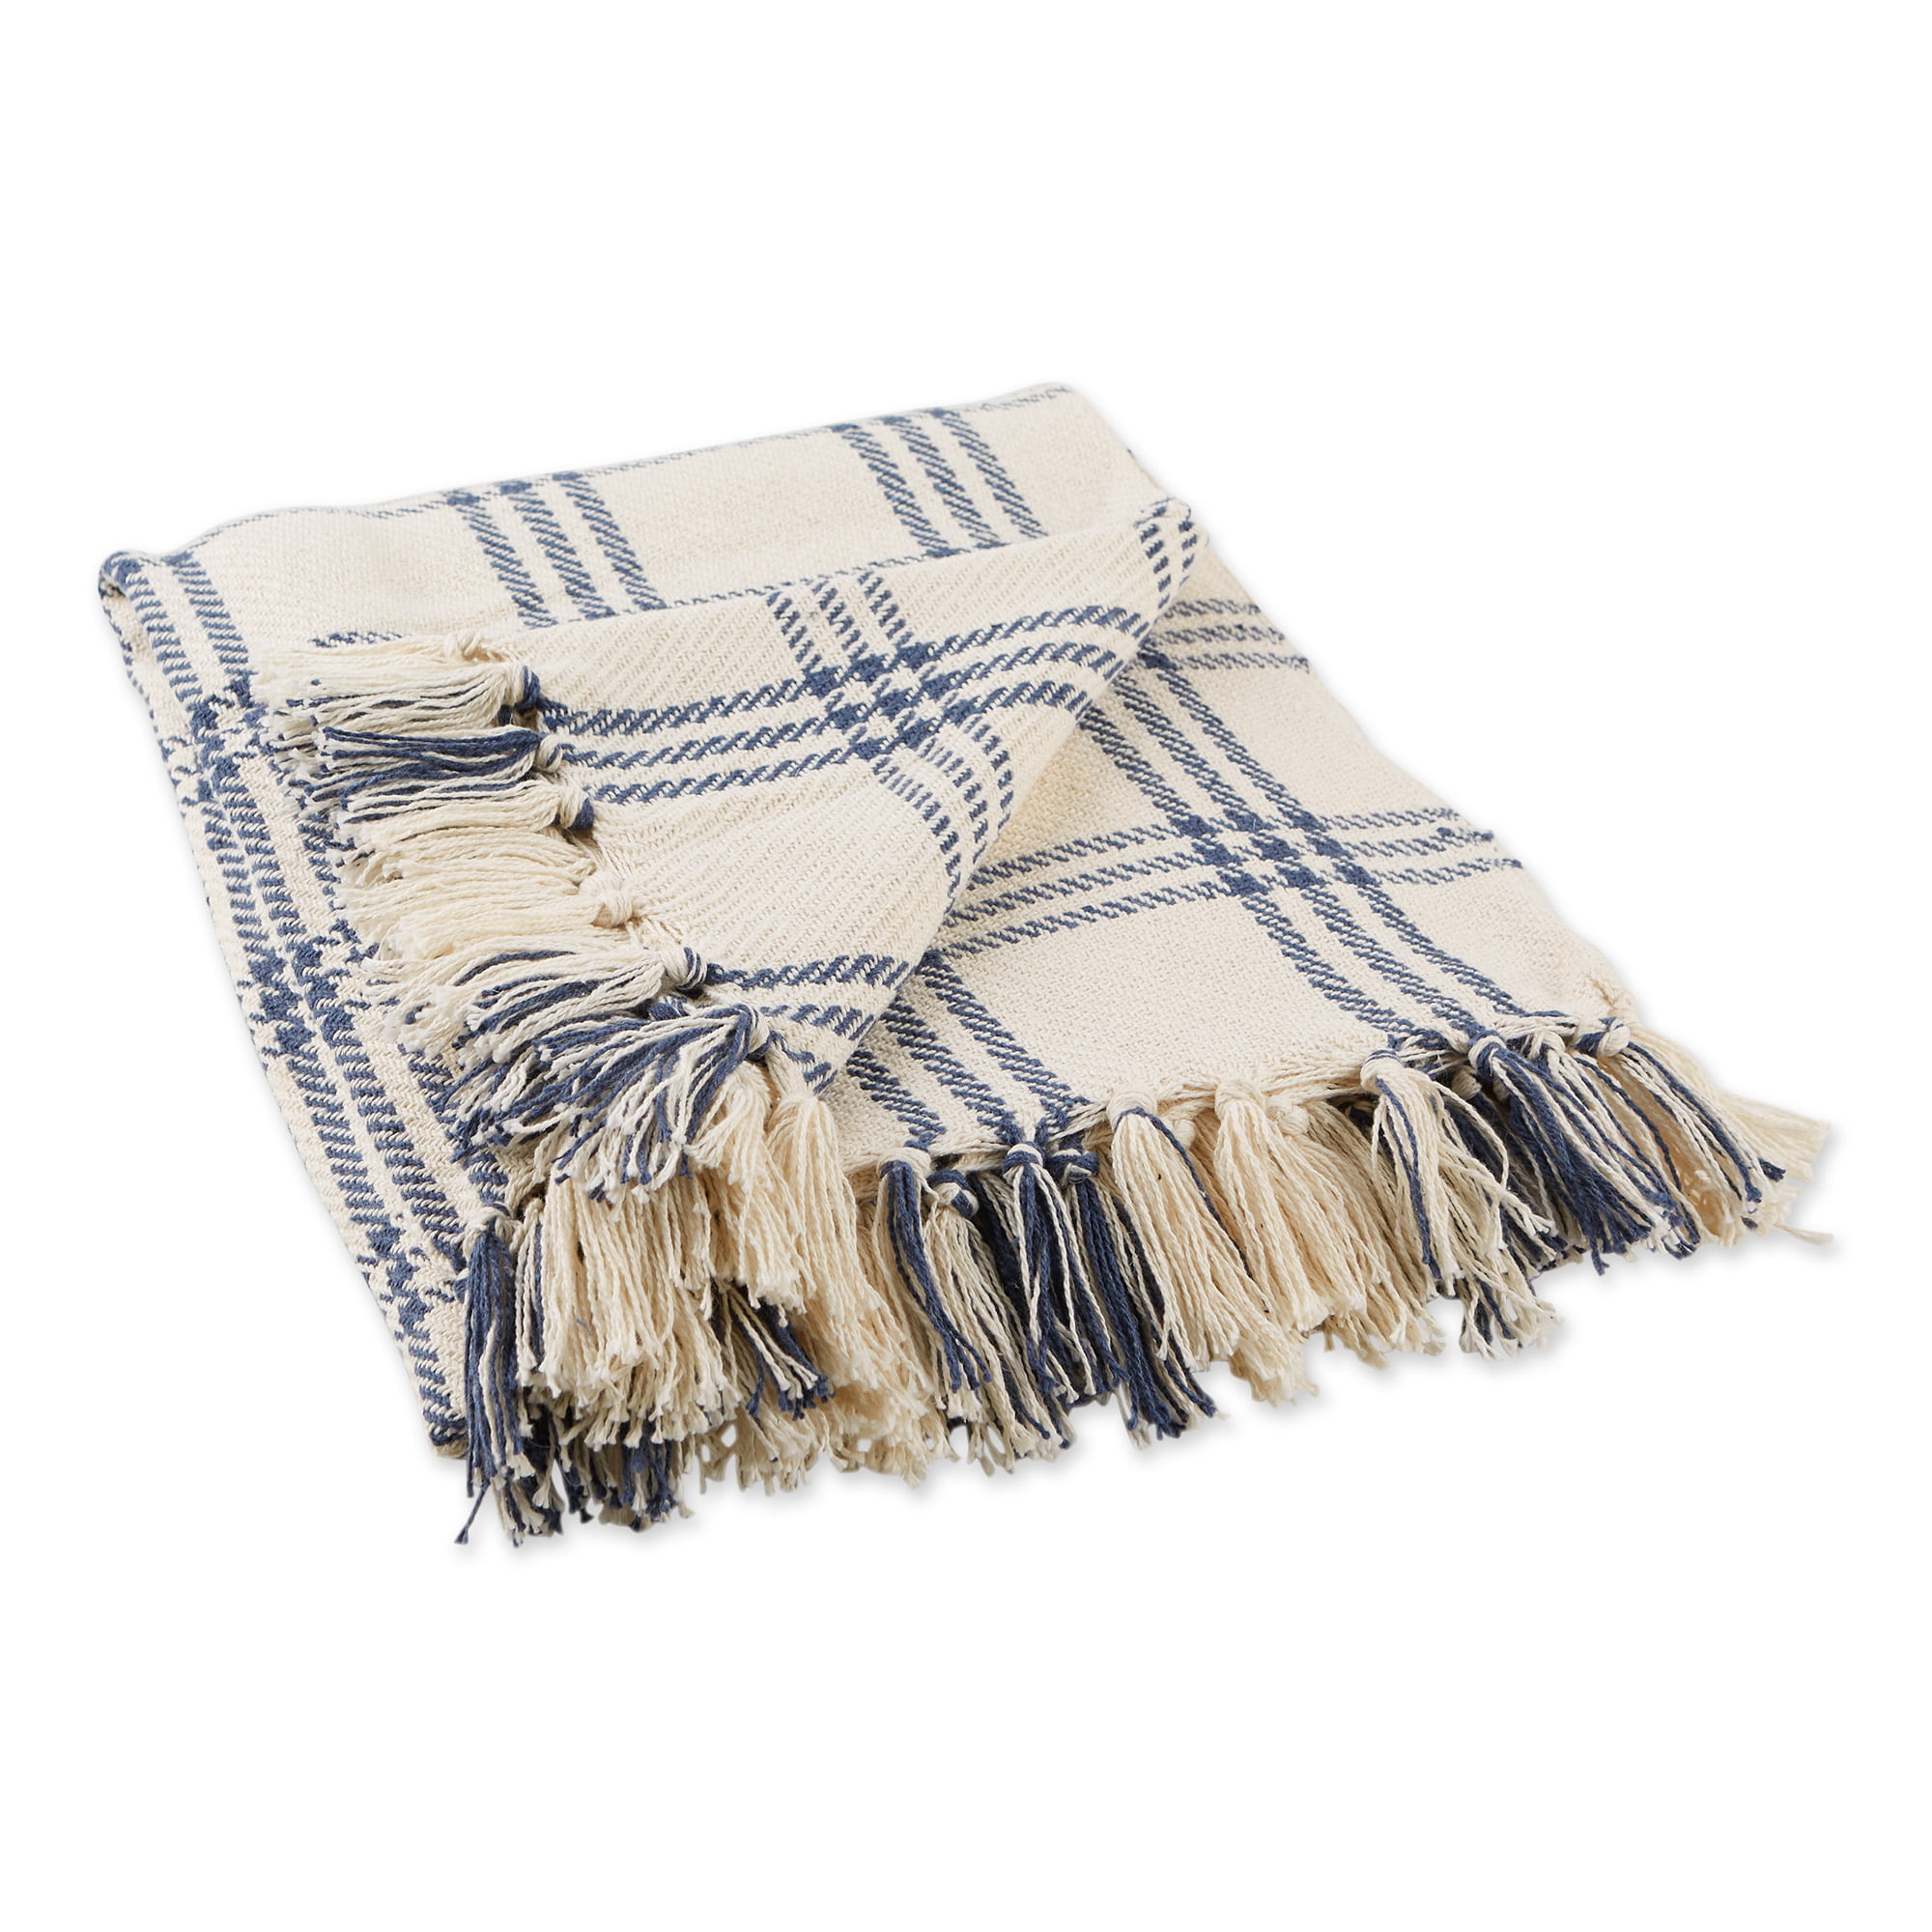 CushyChic Outdoor 38 x 68" Fringed Blanket Throws in 14 Colors 